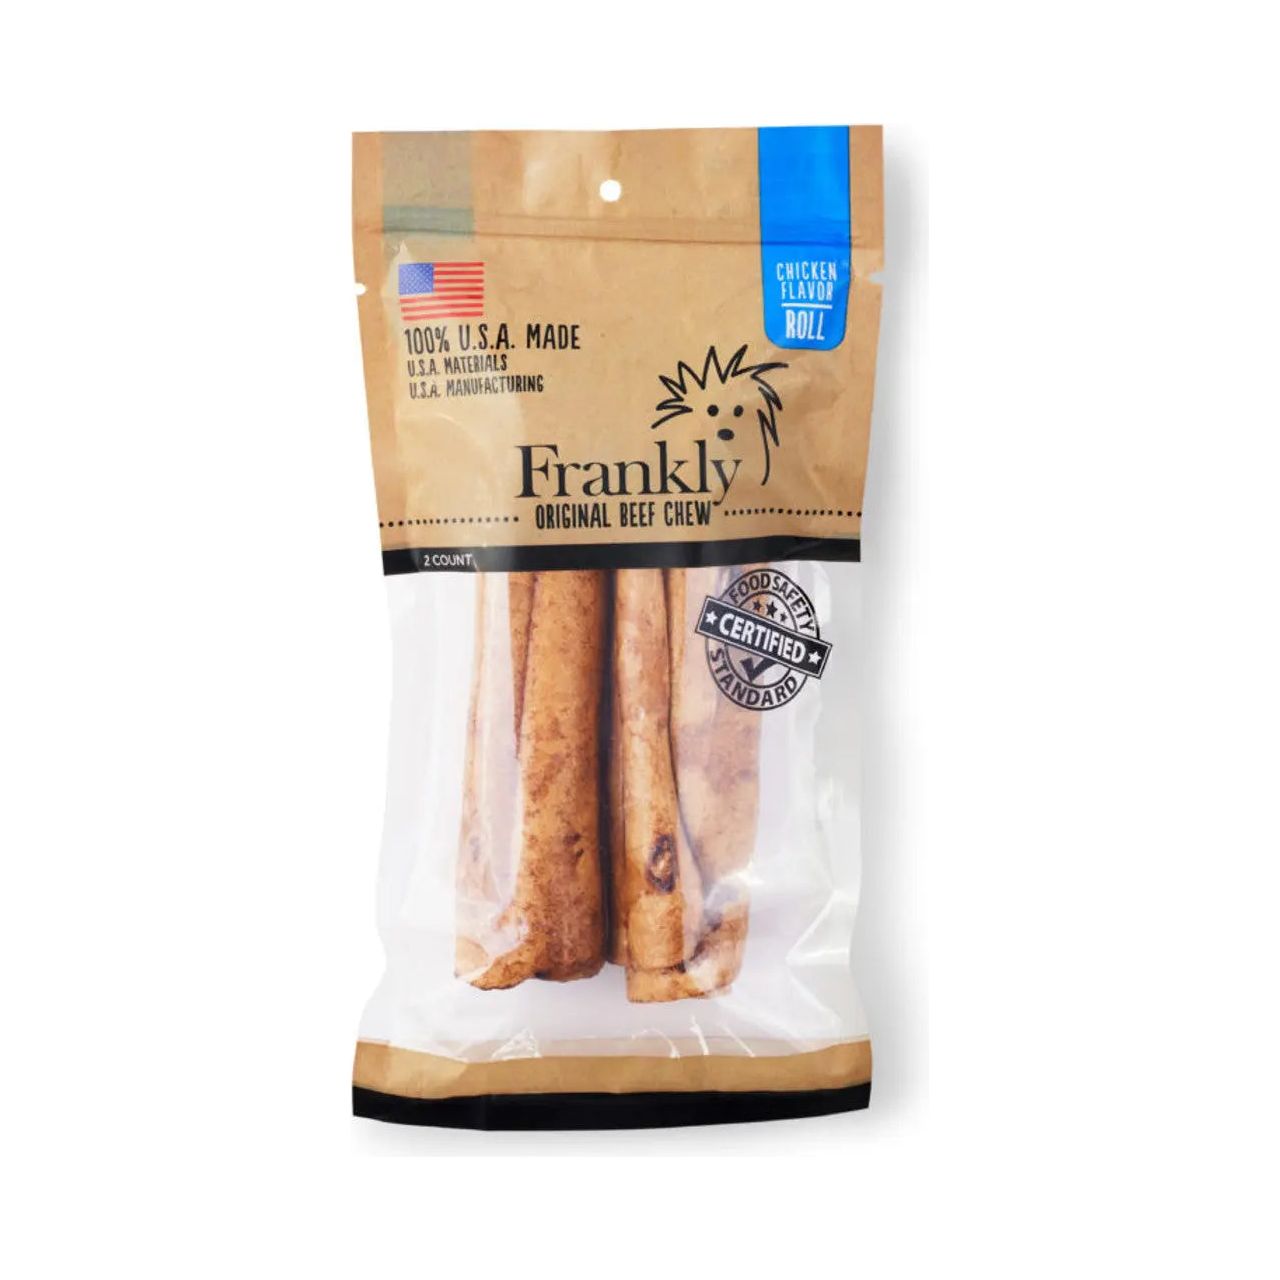 Frankly Pet Beef Roll Dog Chew Frankly Pet